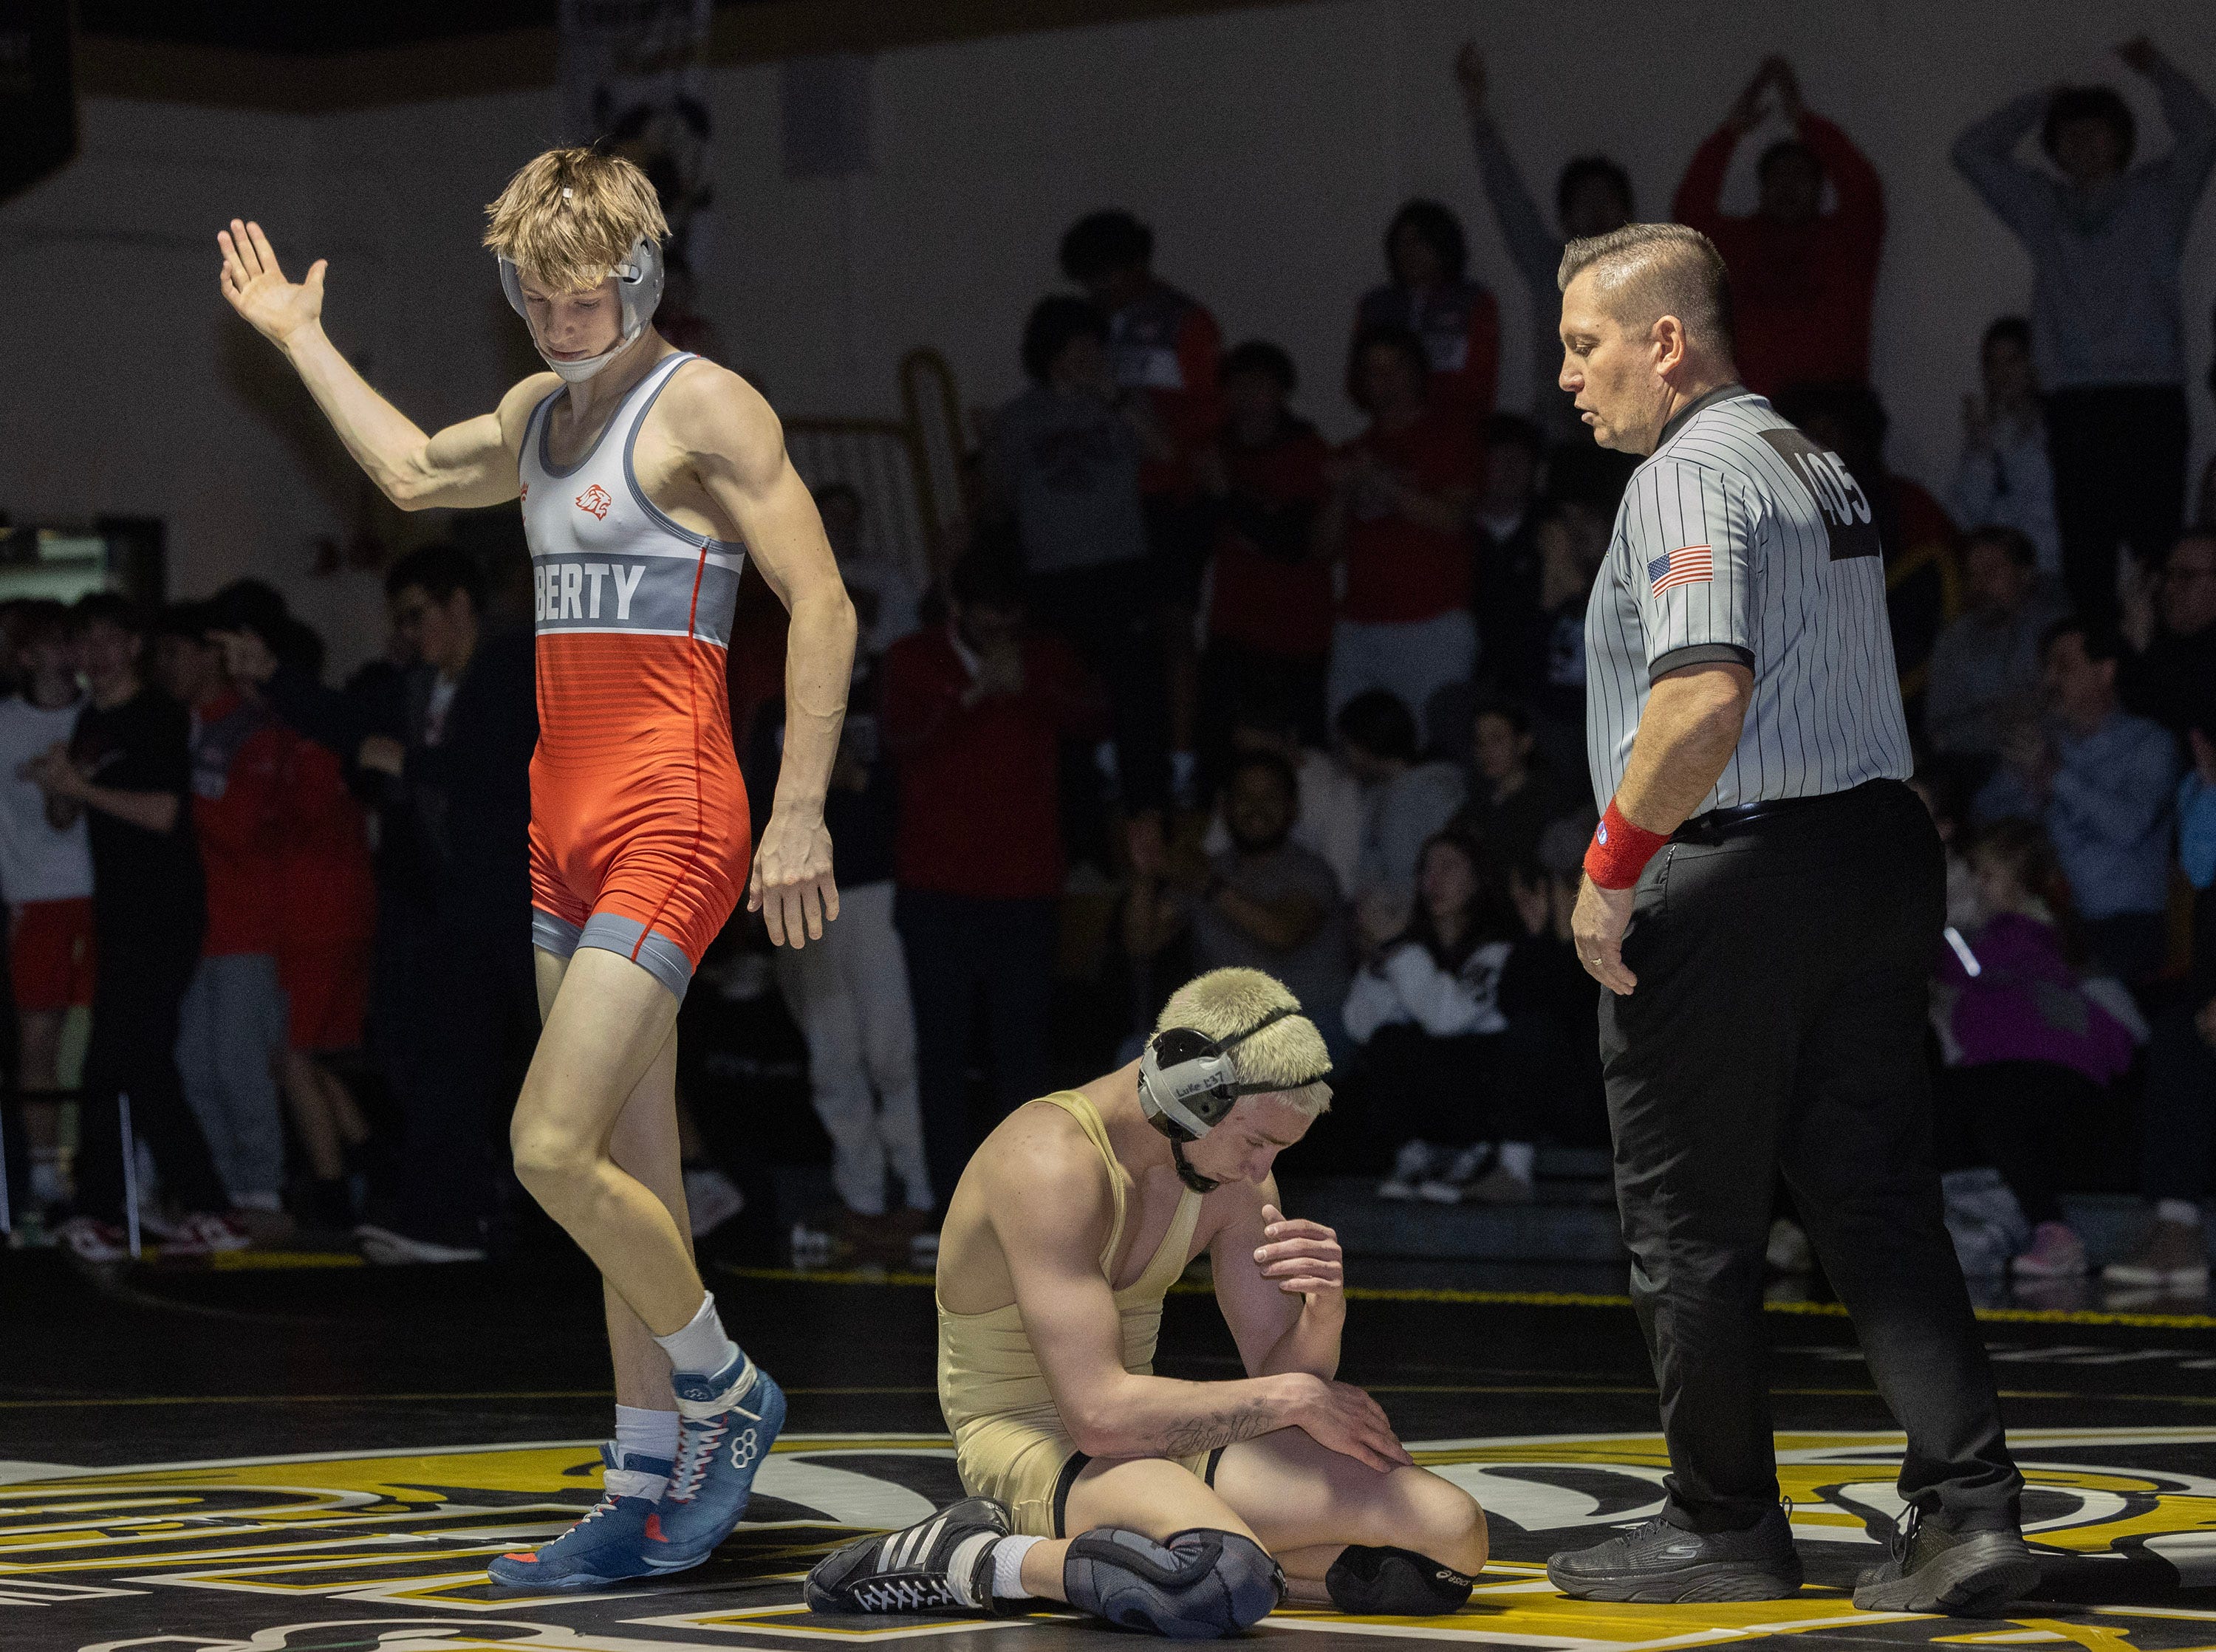 who were the shore conference wrestling stars from week 8 of the 2023-24 season?